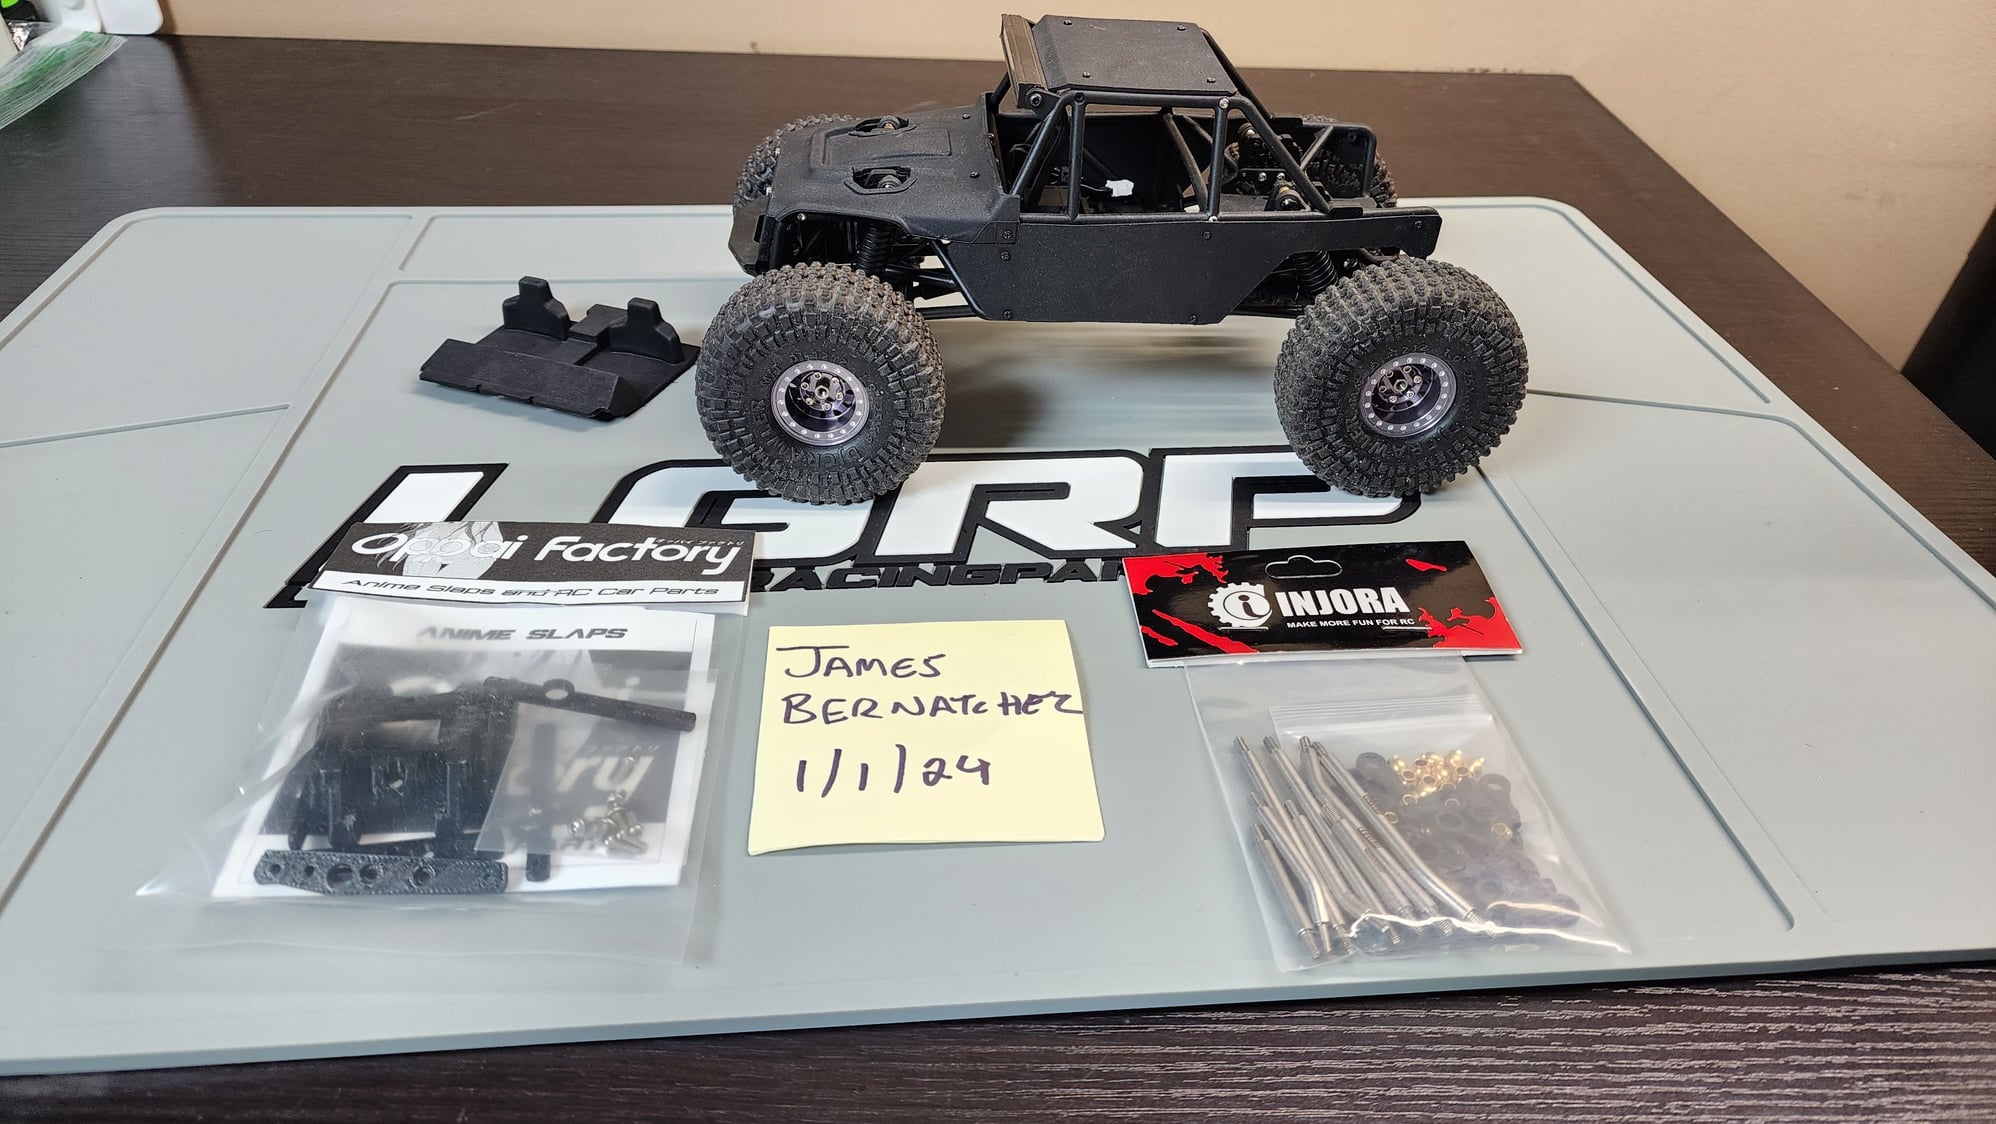 Meus racing ripper chassis kit for TRX4M : r/TRX4M